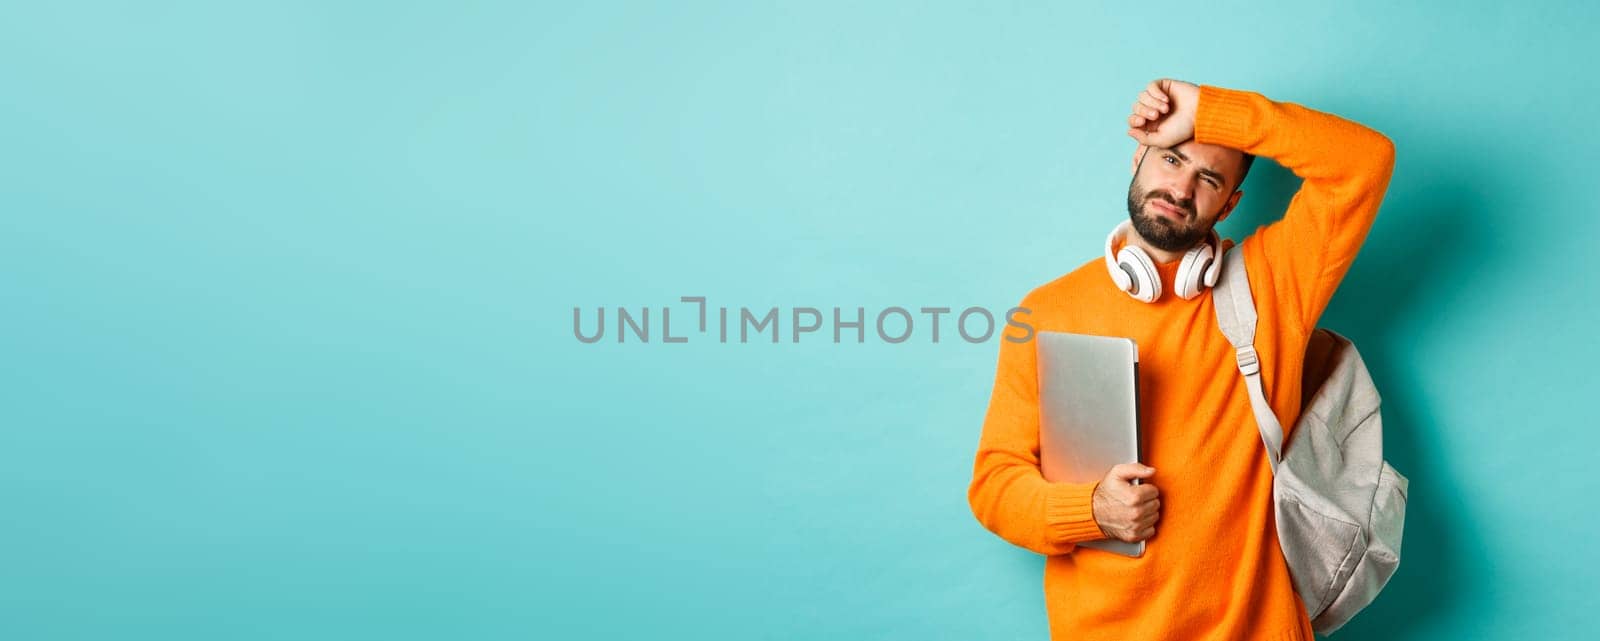 Tired male student wiping sweat off forehead, holding laptop and backpack, standing in orange sweater by turquoise background.